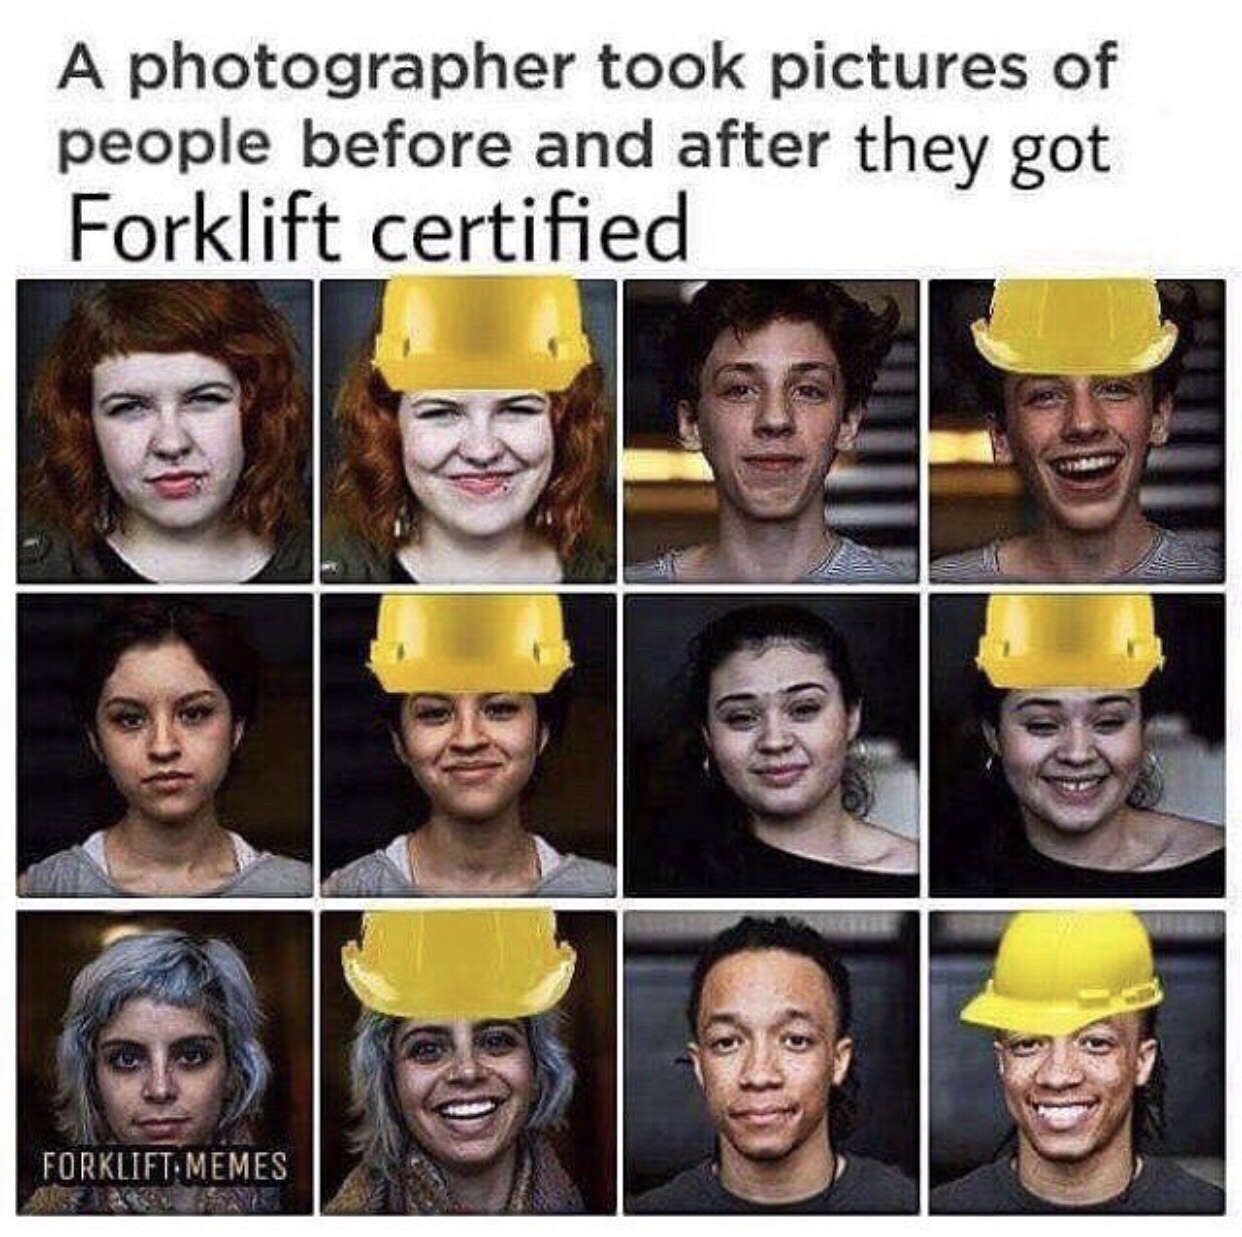 meme - forklift certified meme - A photographer took pictures of people before and after they got Forklift certified Forklift Memes